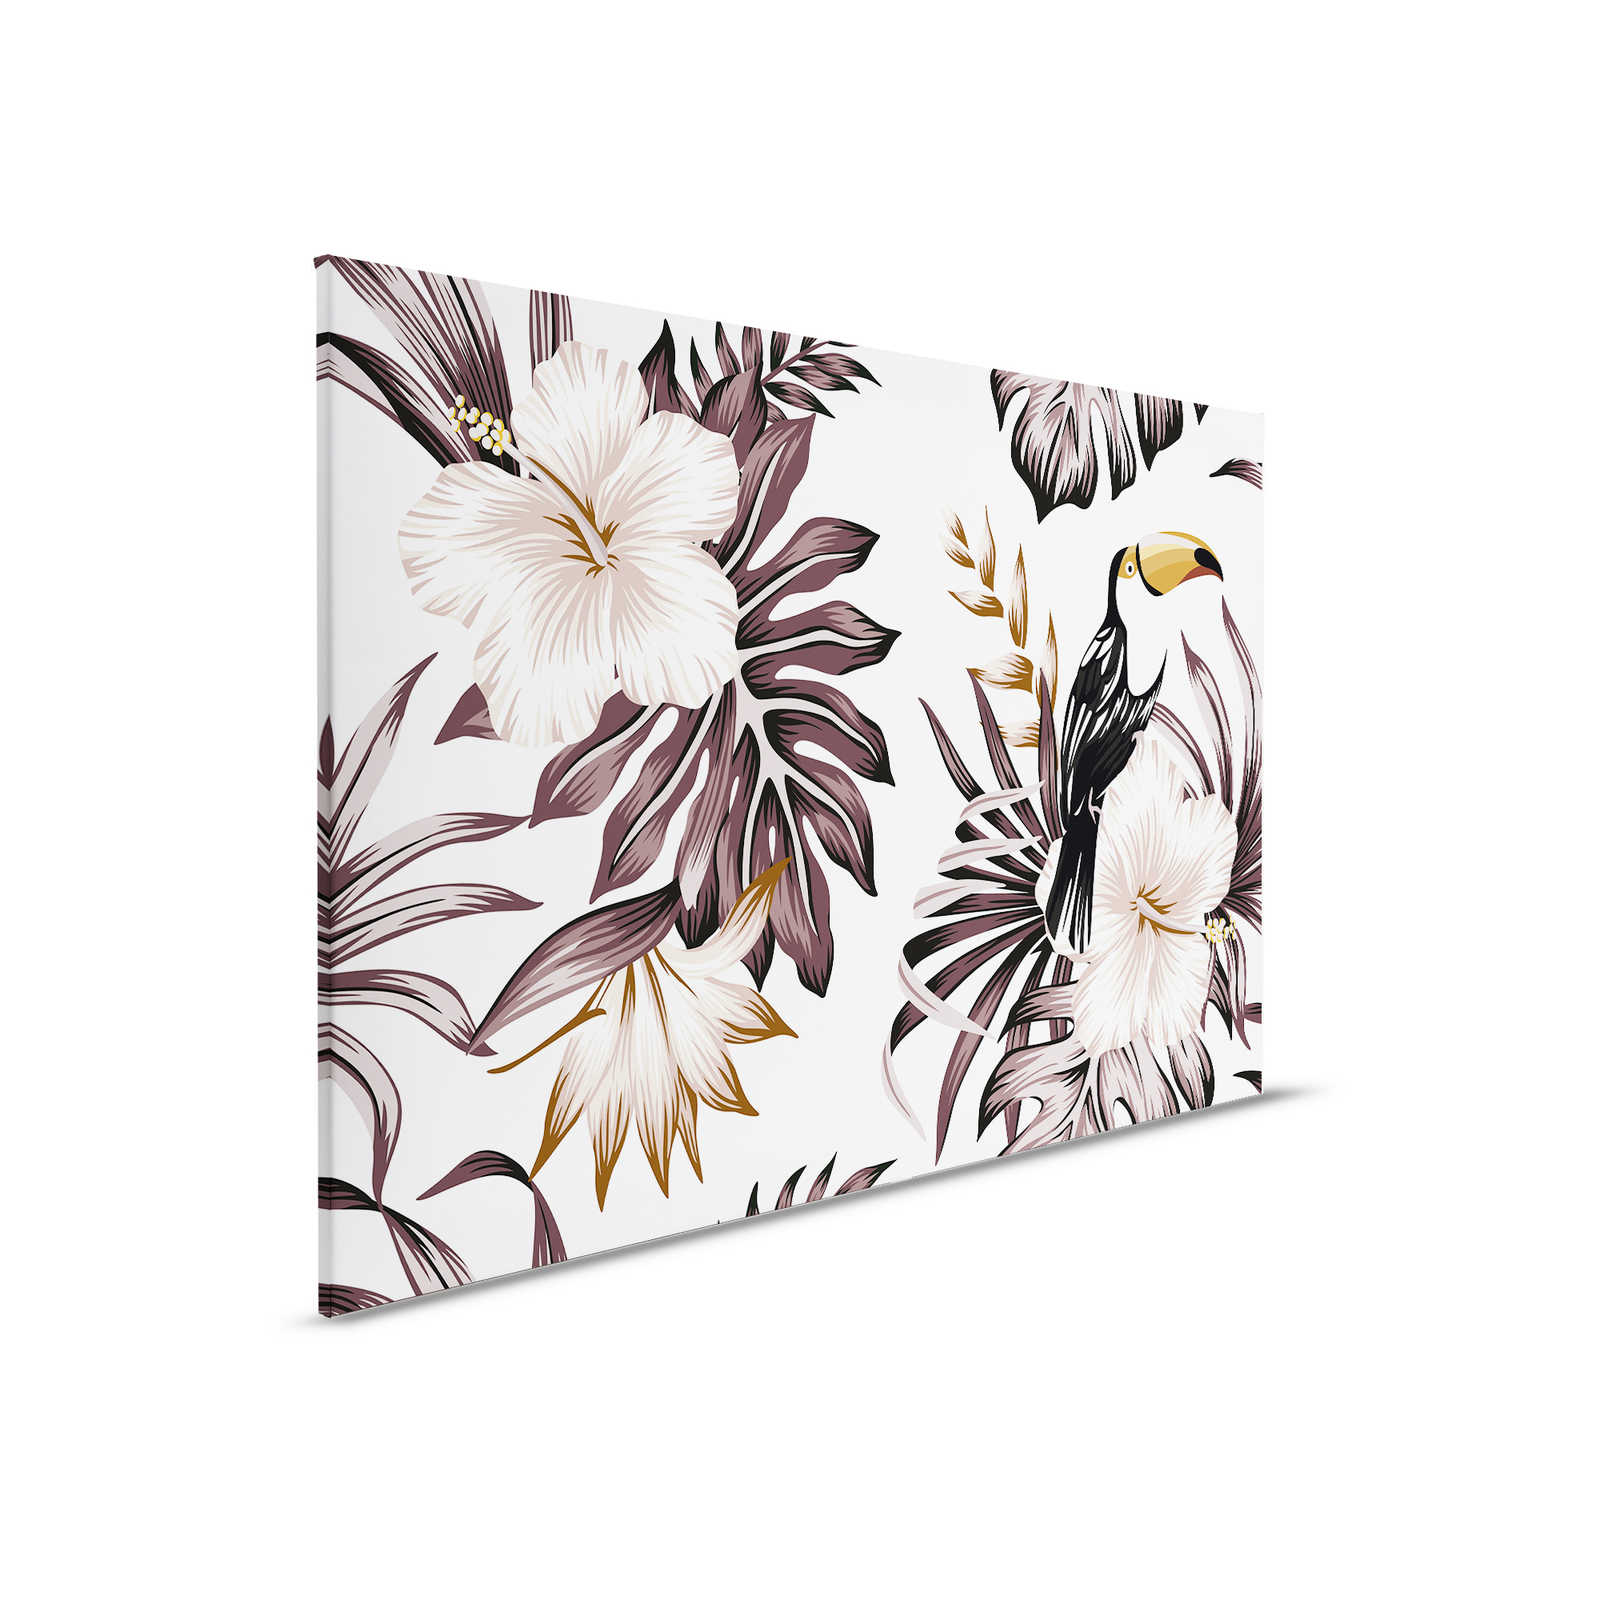 Canvas with jungle plants and pelican | Grey, White, Black - 0.90 m x 0.60 m
